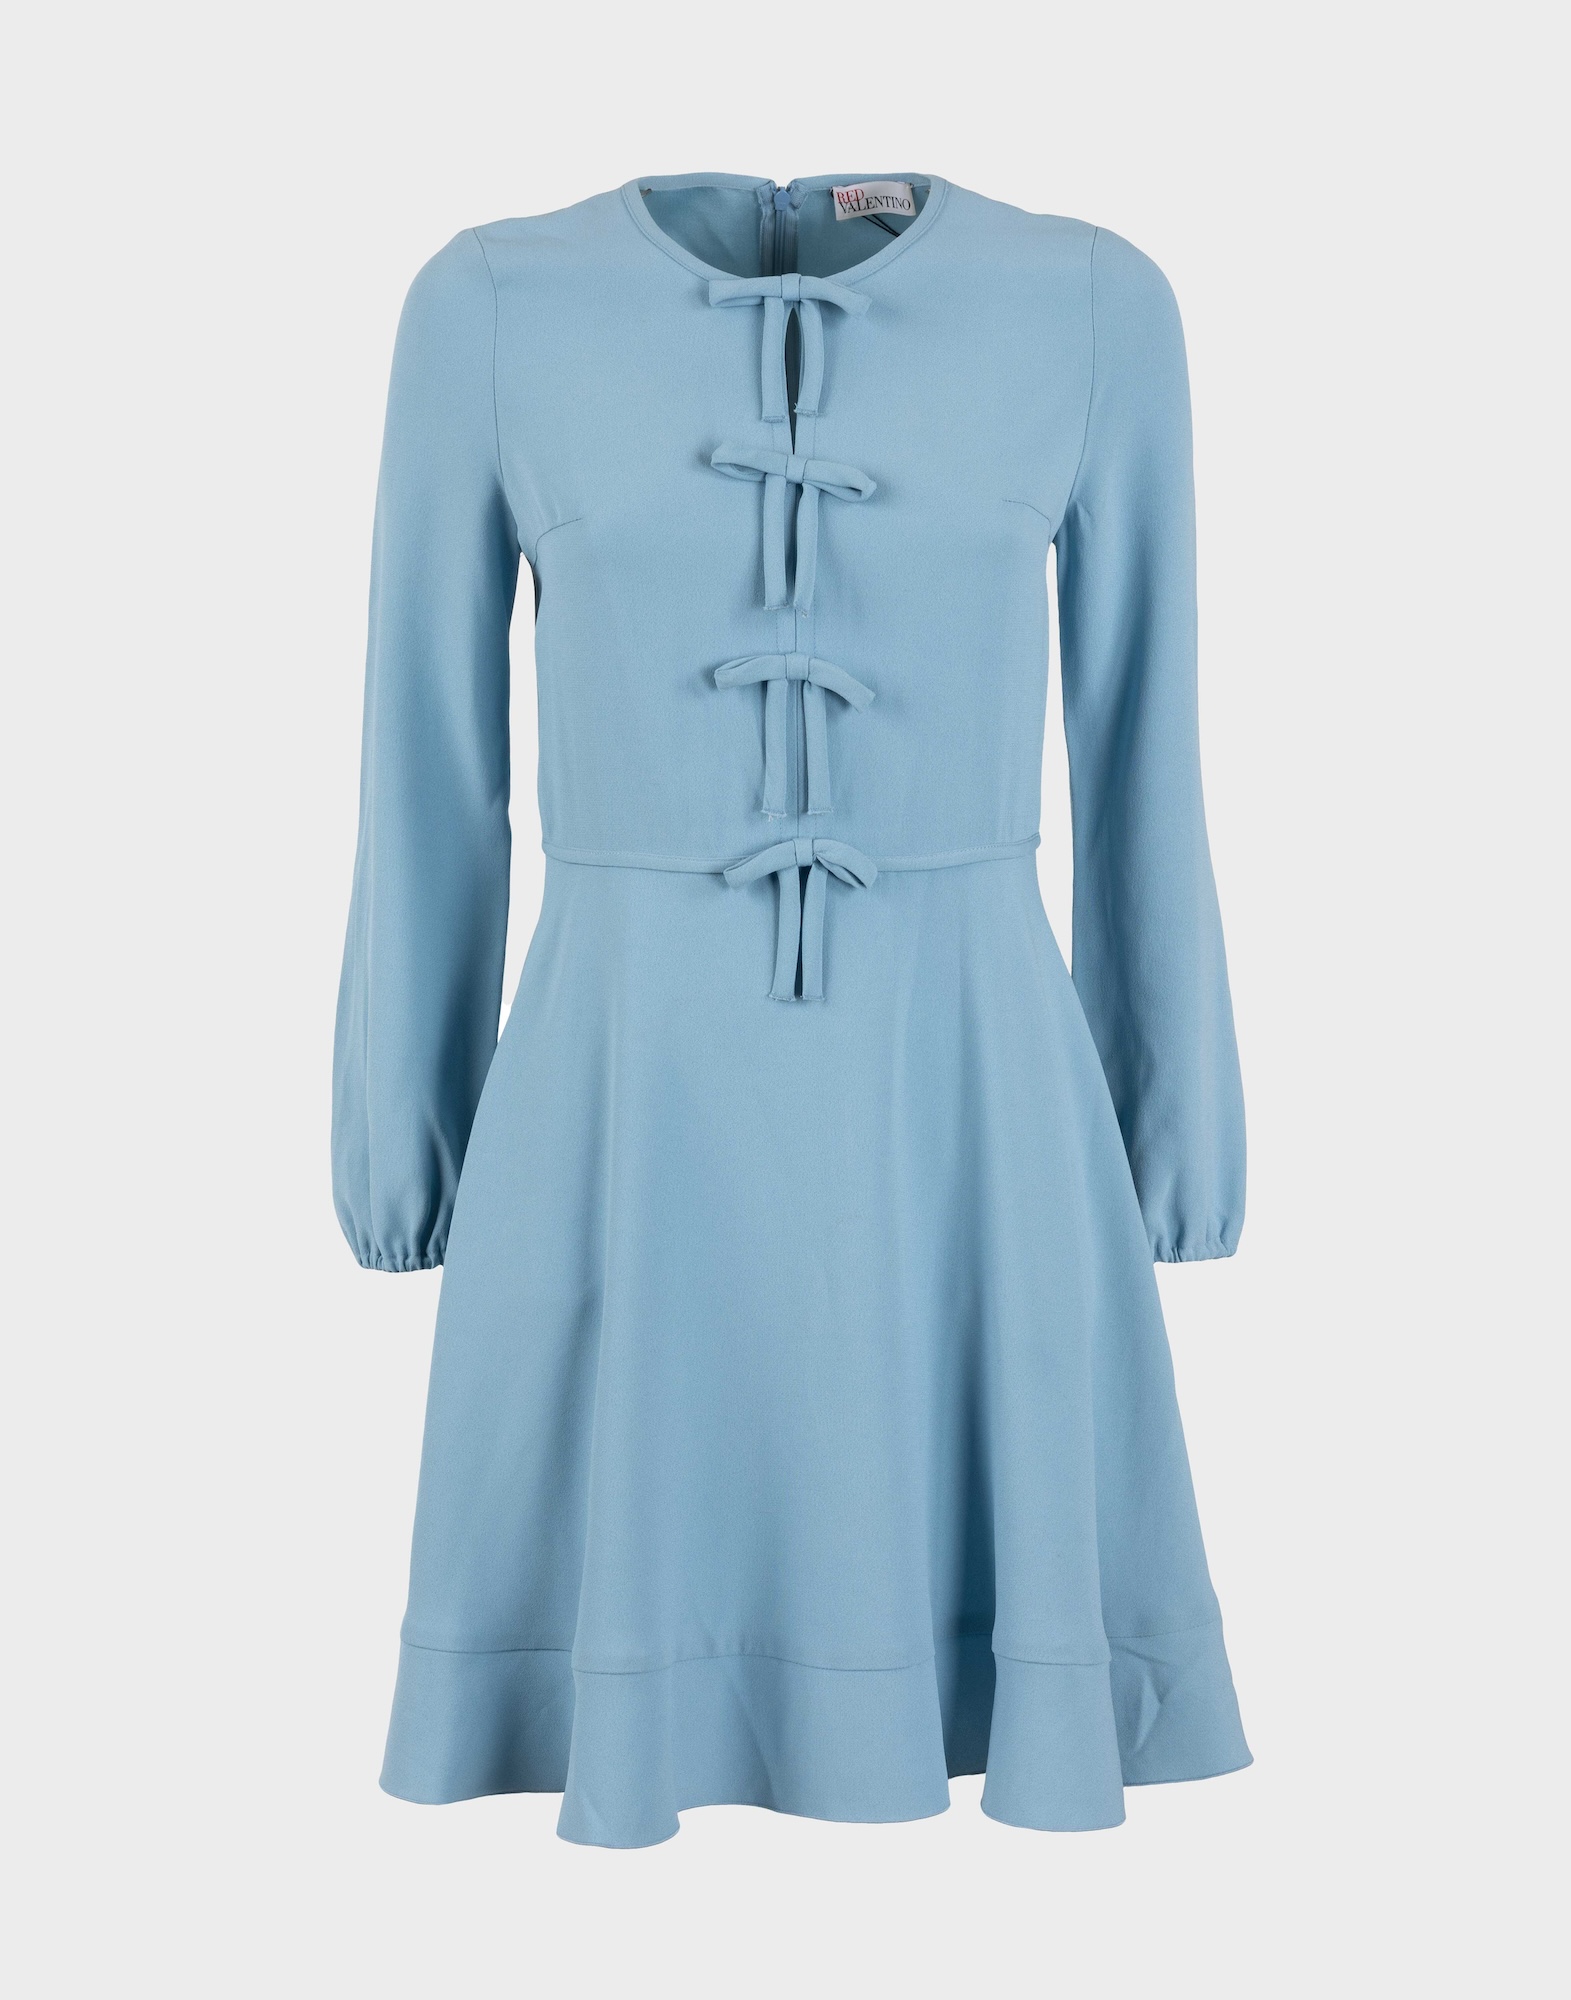 light blue long-sleeved women's dress with appliqué bows